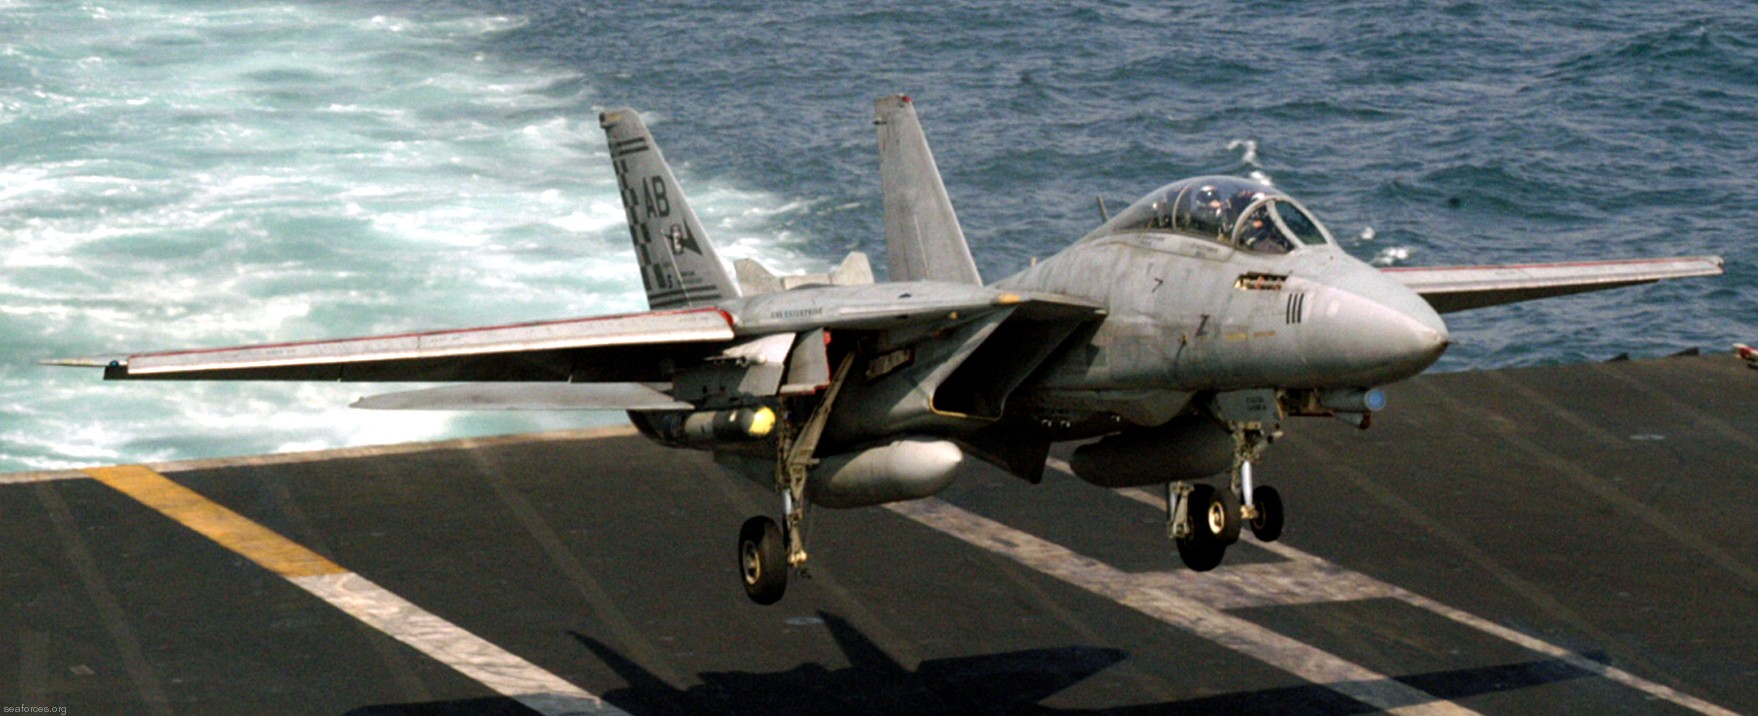 vf-211 fighting checkmates fighter squadron f-14a tomcat us navy carrier air wing cvw-1 uss enterprise cvn-65 18